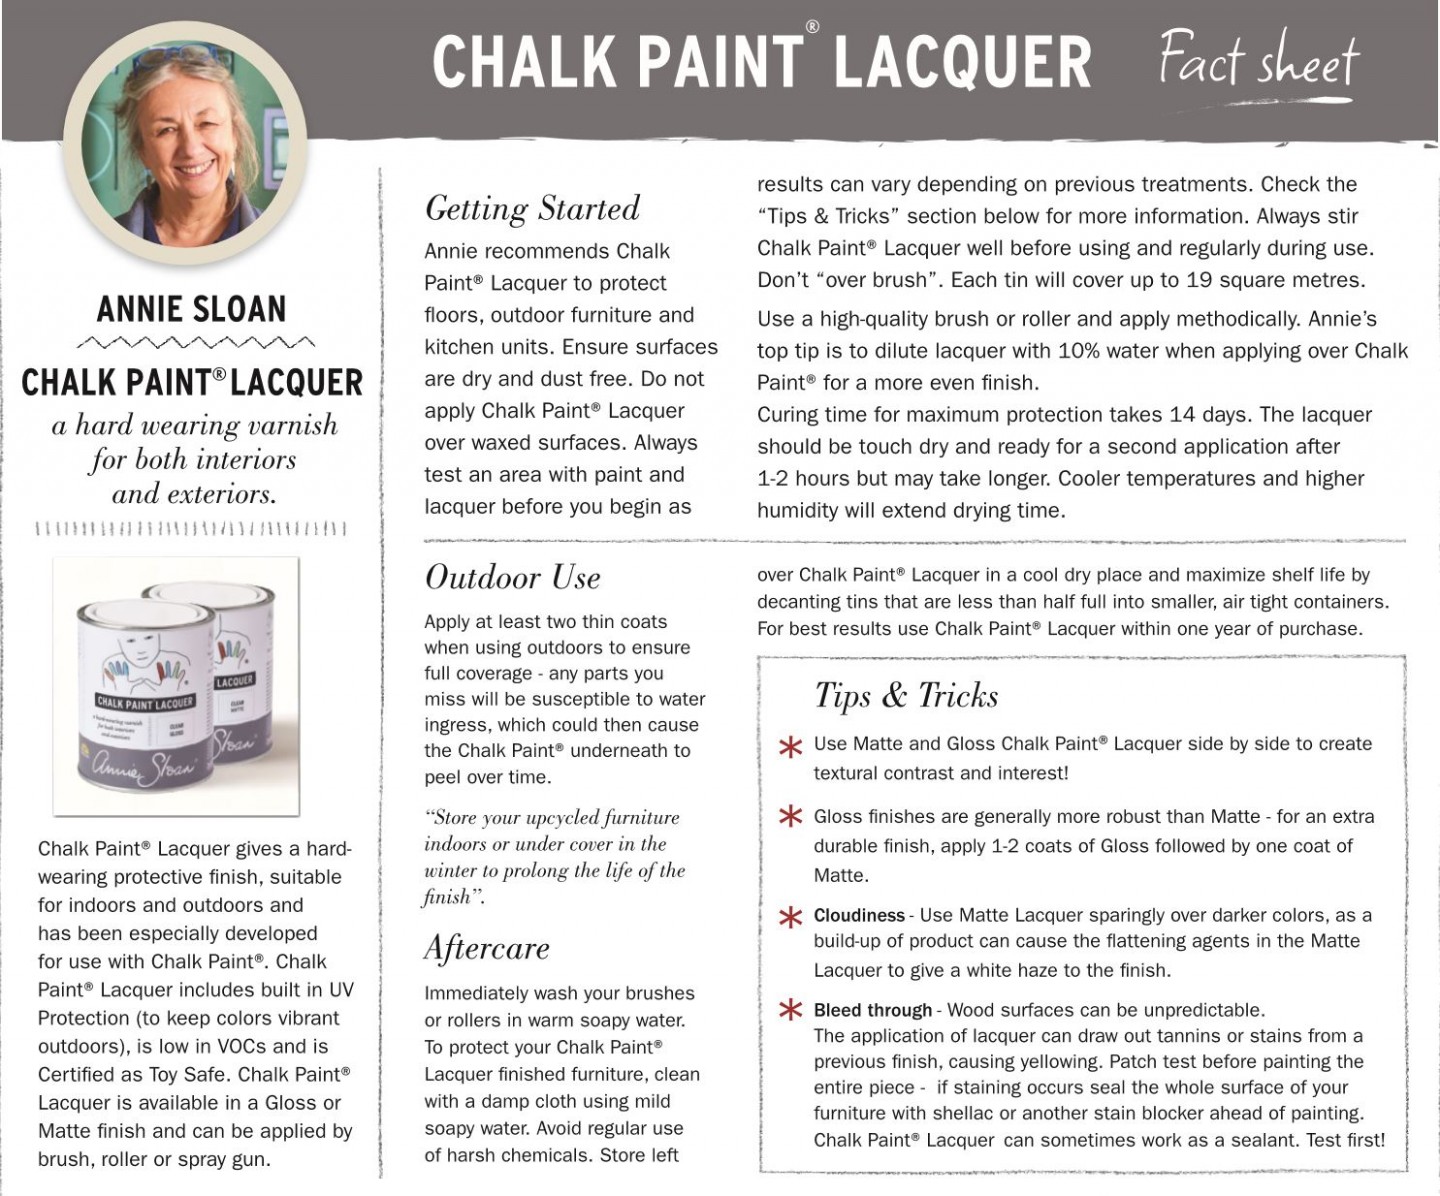 Annie Sloan Lacquer Matte Finish 10ml (interior And Exterior Use) Can I Paint Chalk Paint Over Varnish